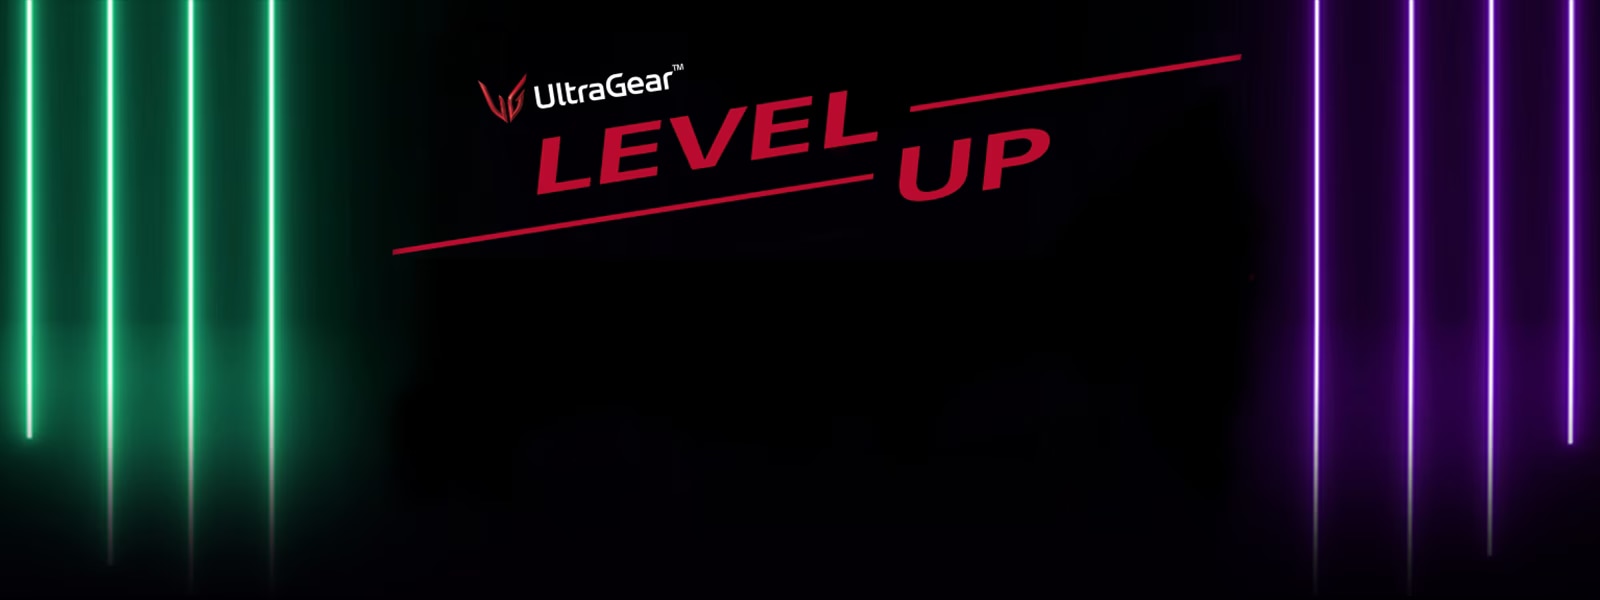 Sign up for our monthly Level Up